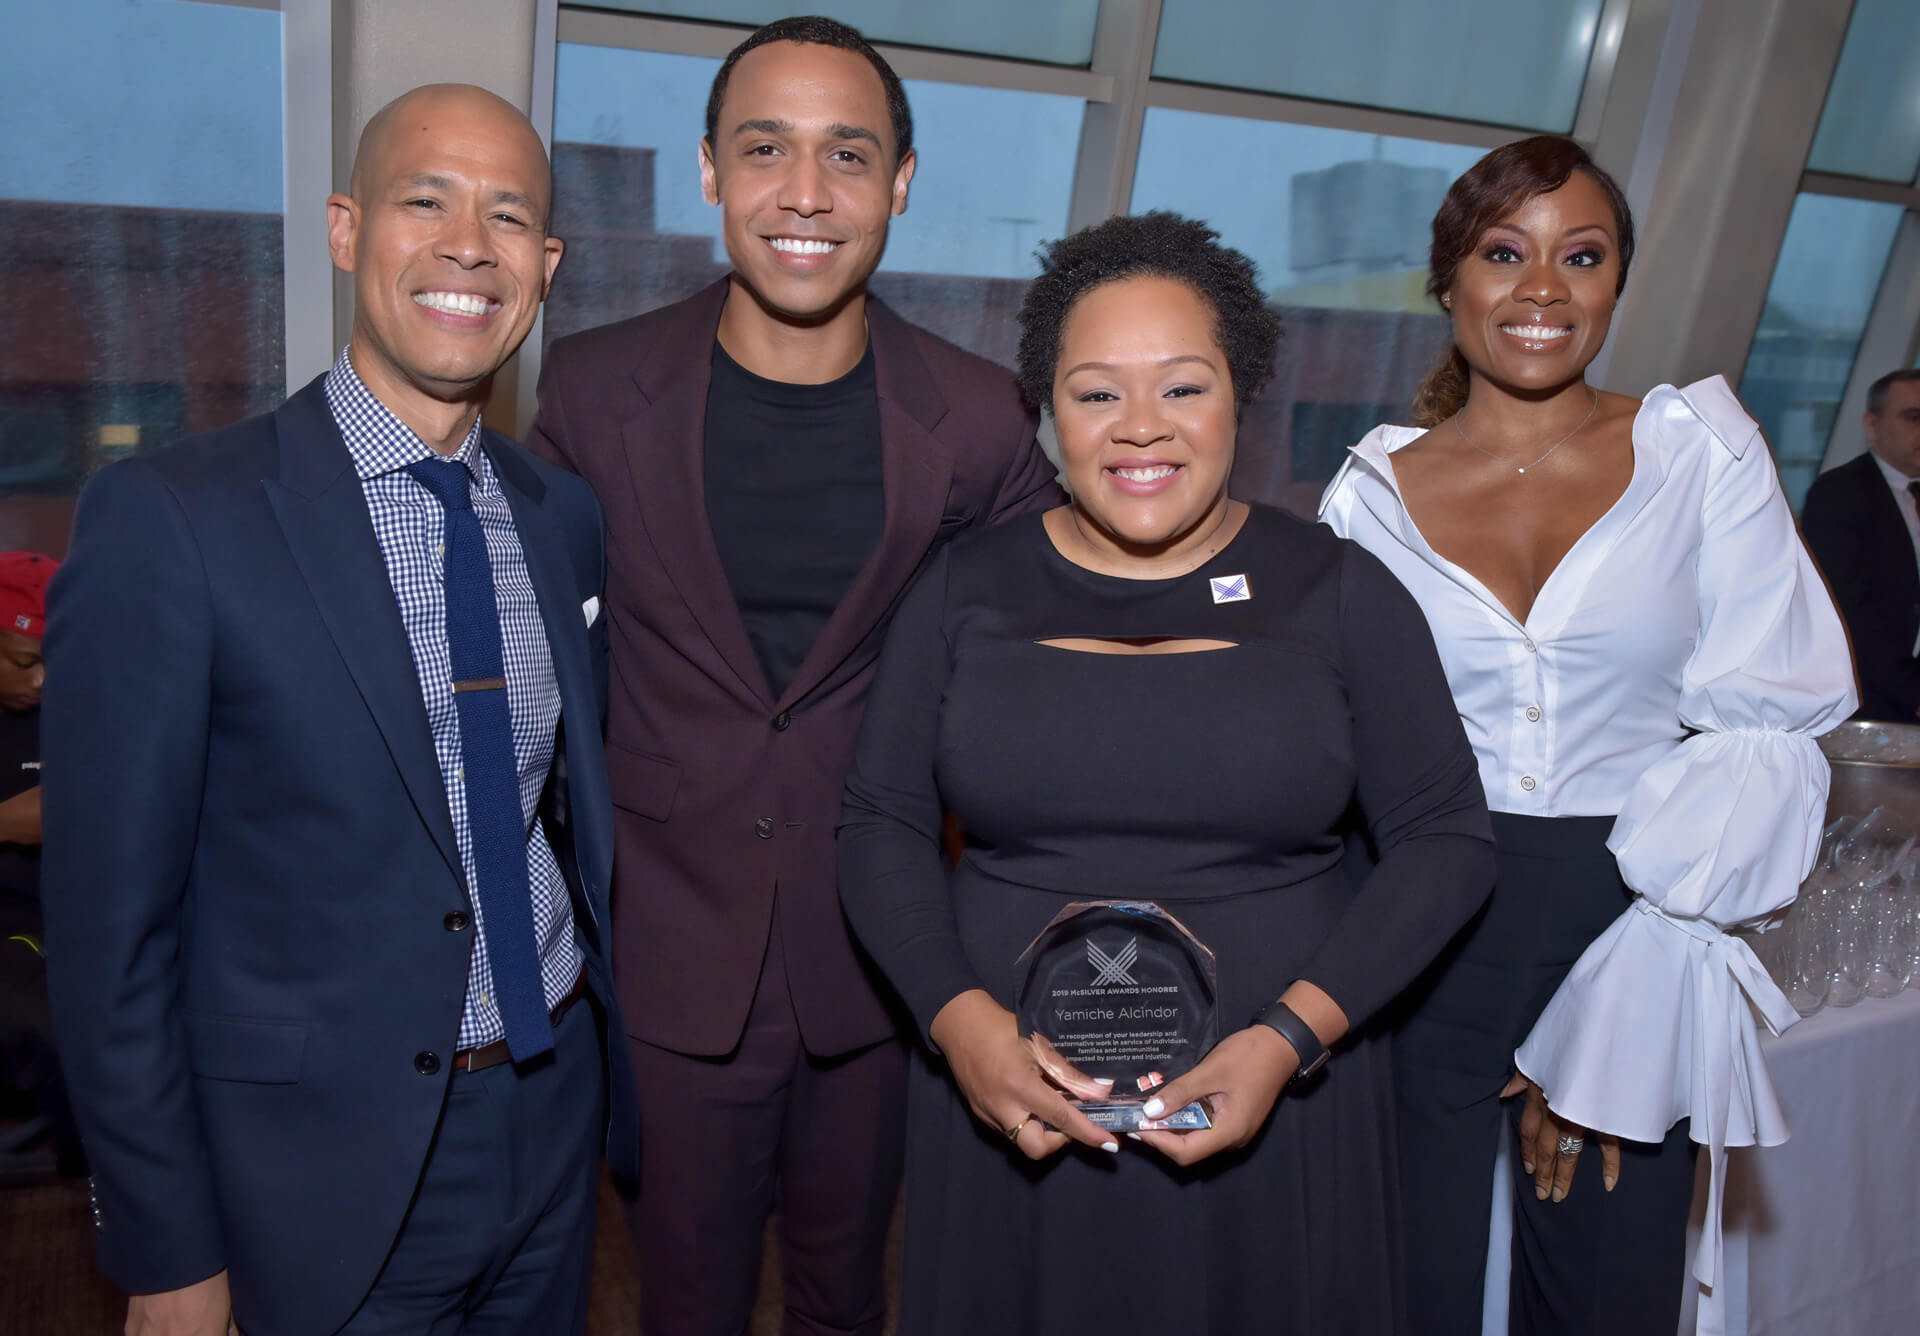 From left: Vladimir Duthiers, Lionel Moïse, Alcindor, and Midwin Charles, at the 2019 McSilver Awards